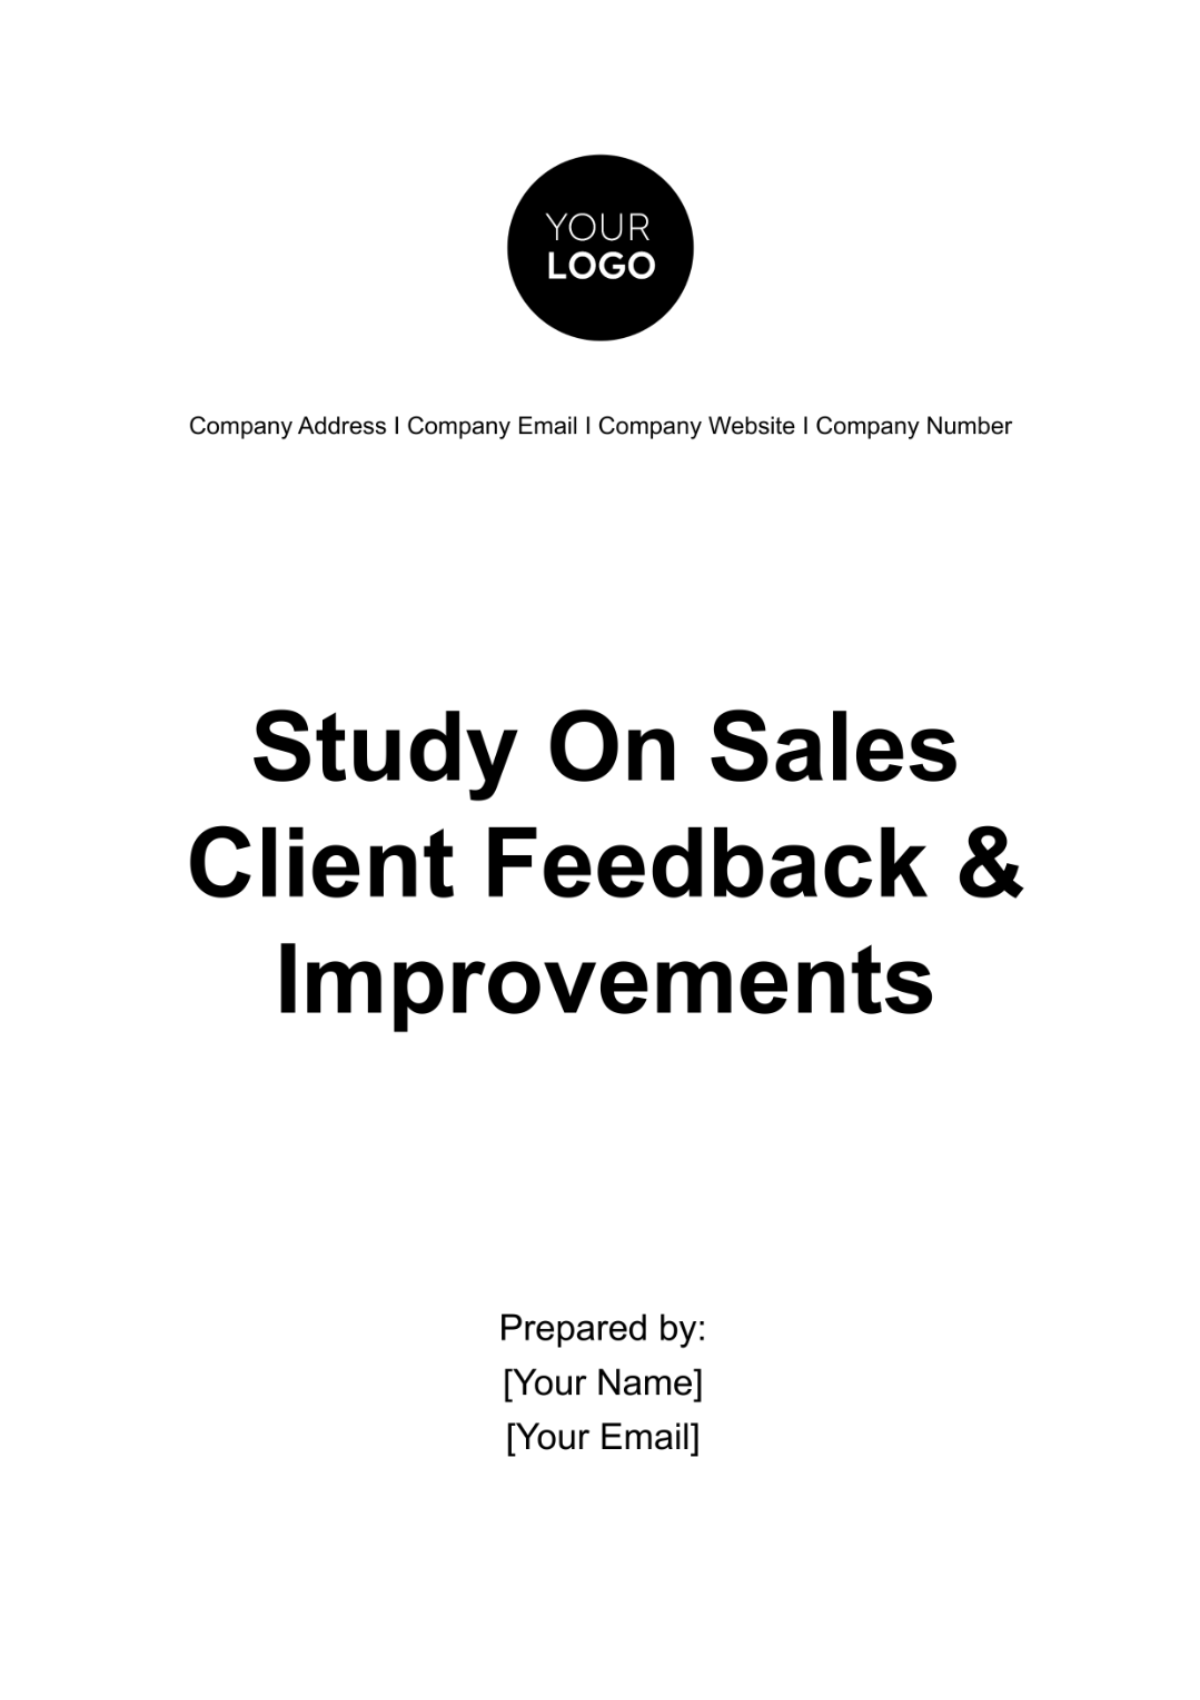 Study on Sales Client Feedback and Improvements Template